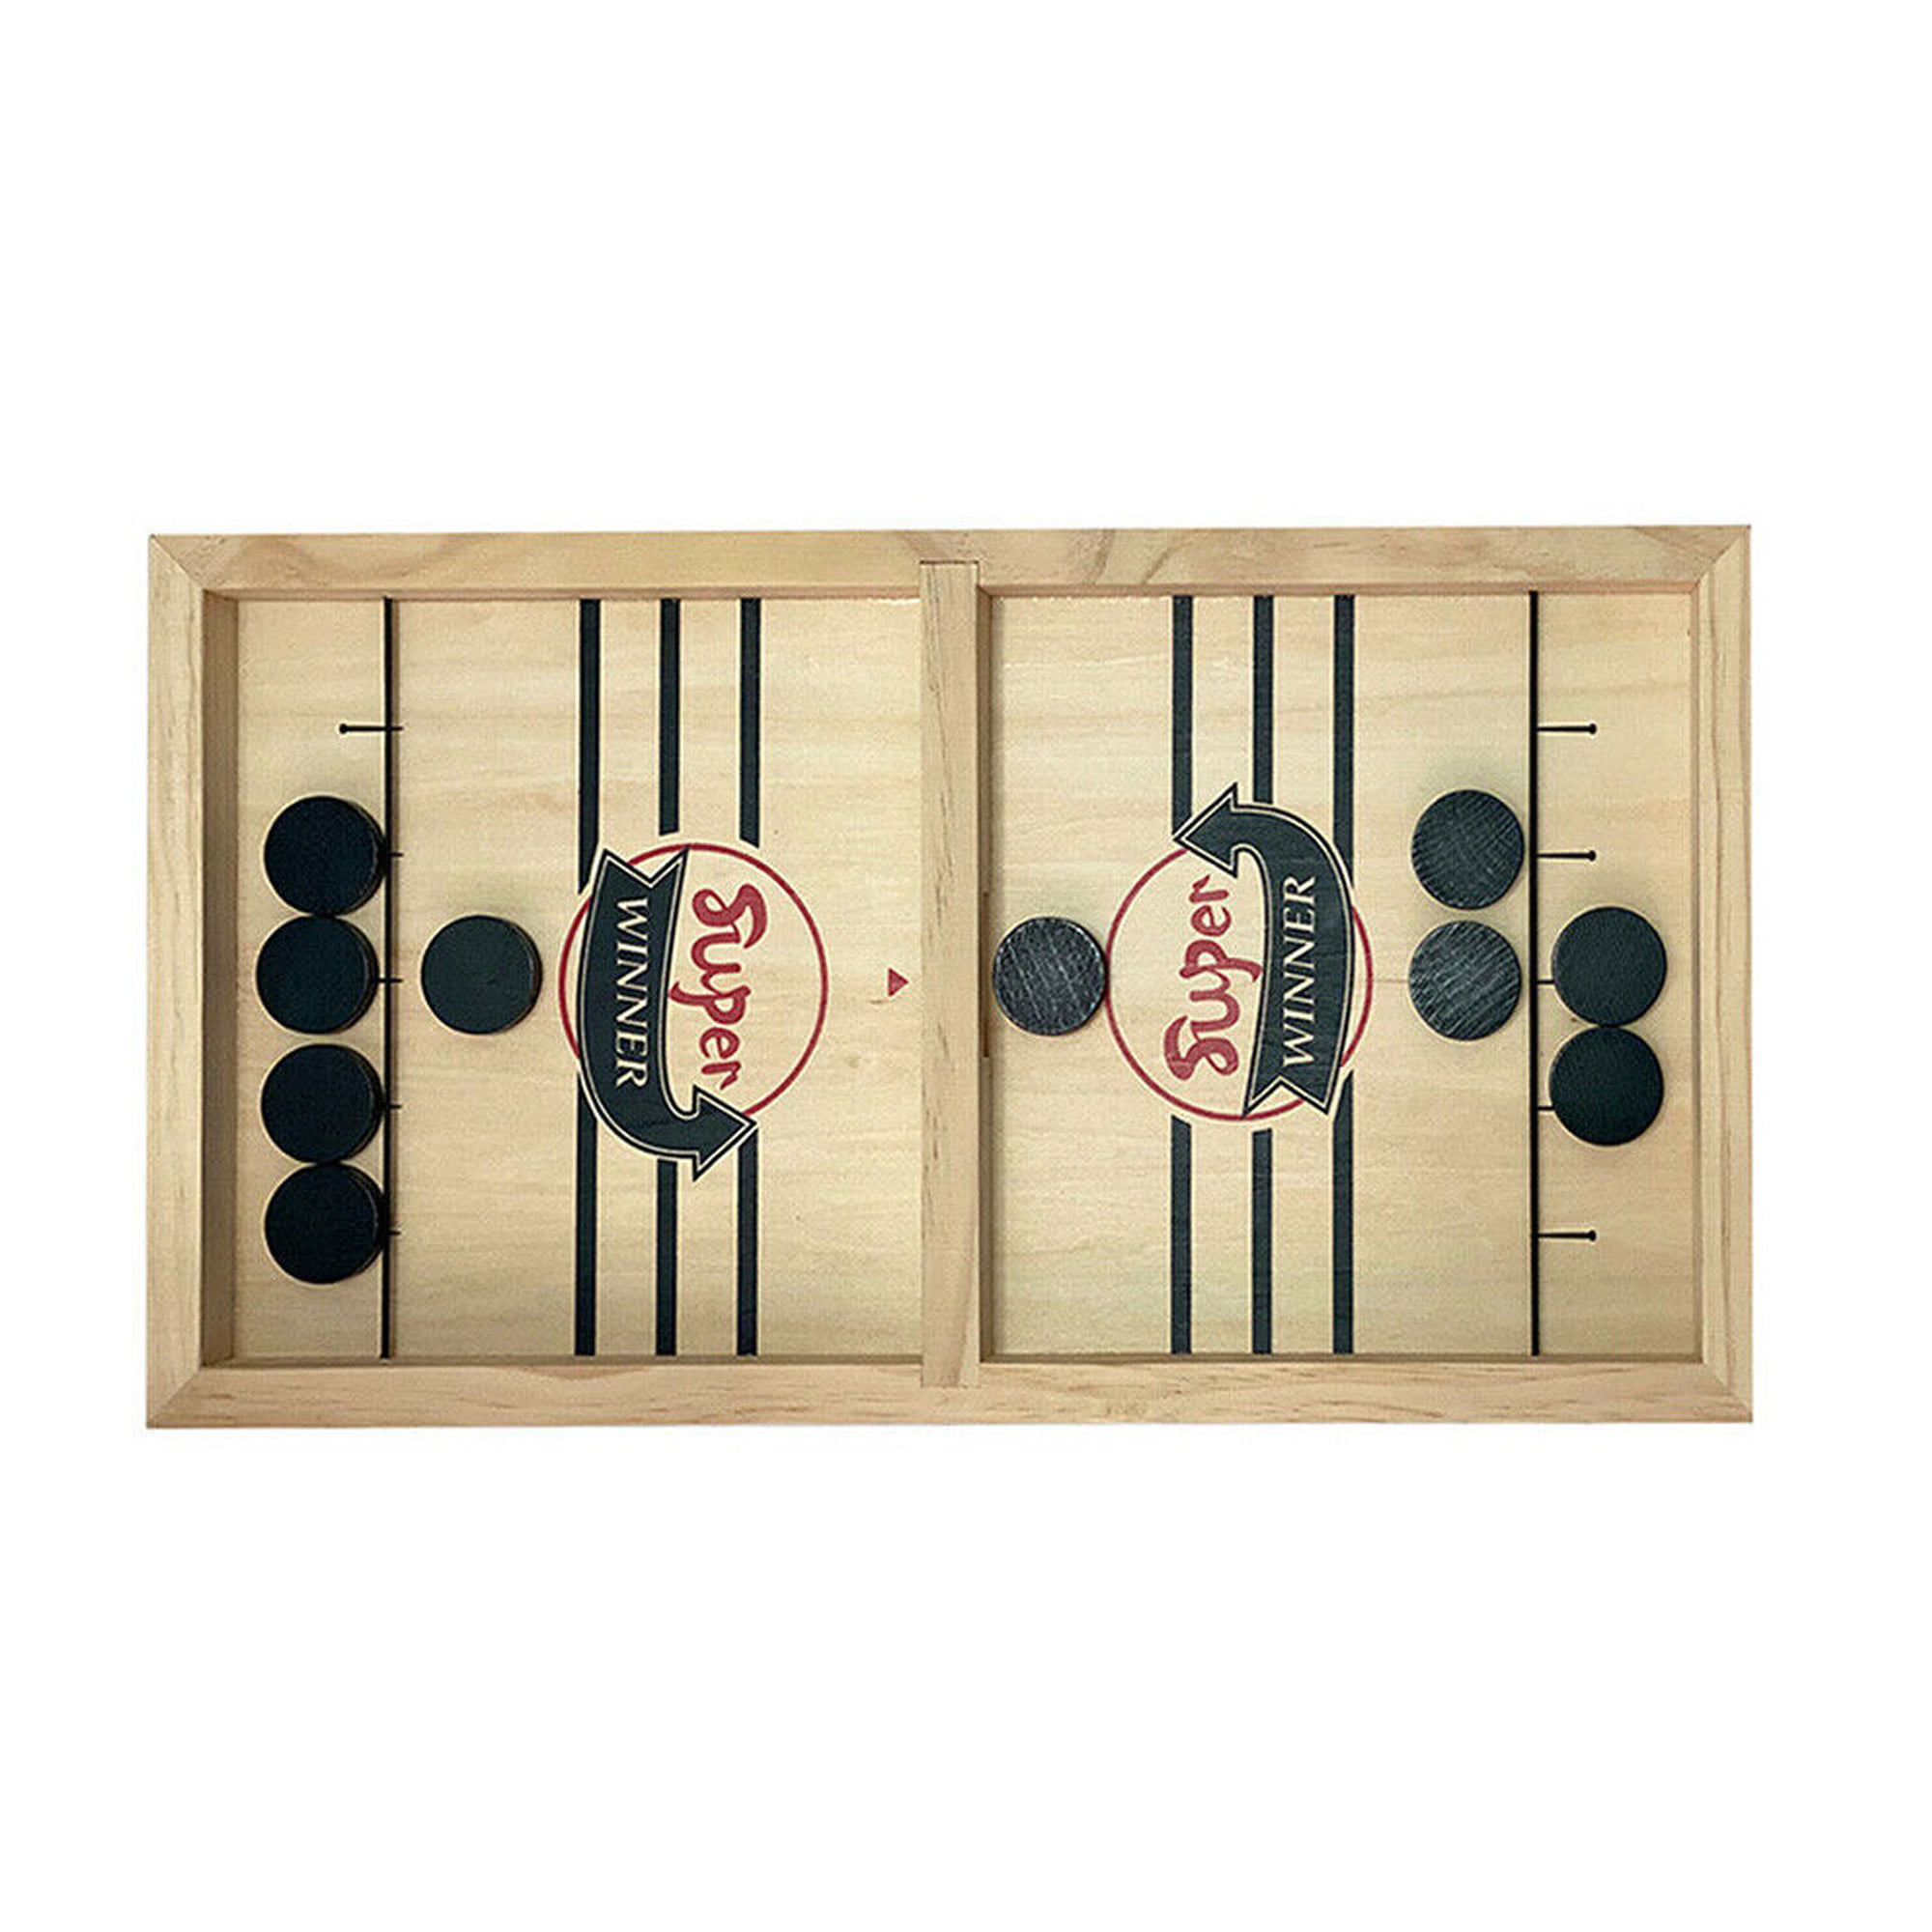 Classic Games Backgammon Entertaining Good For Intellect